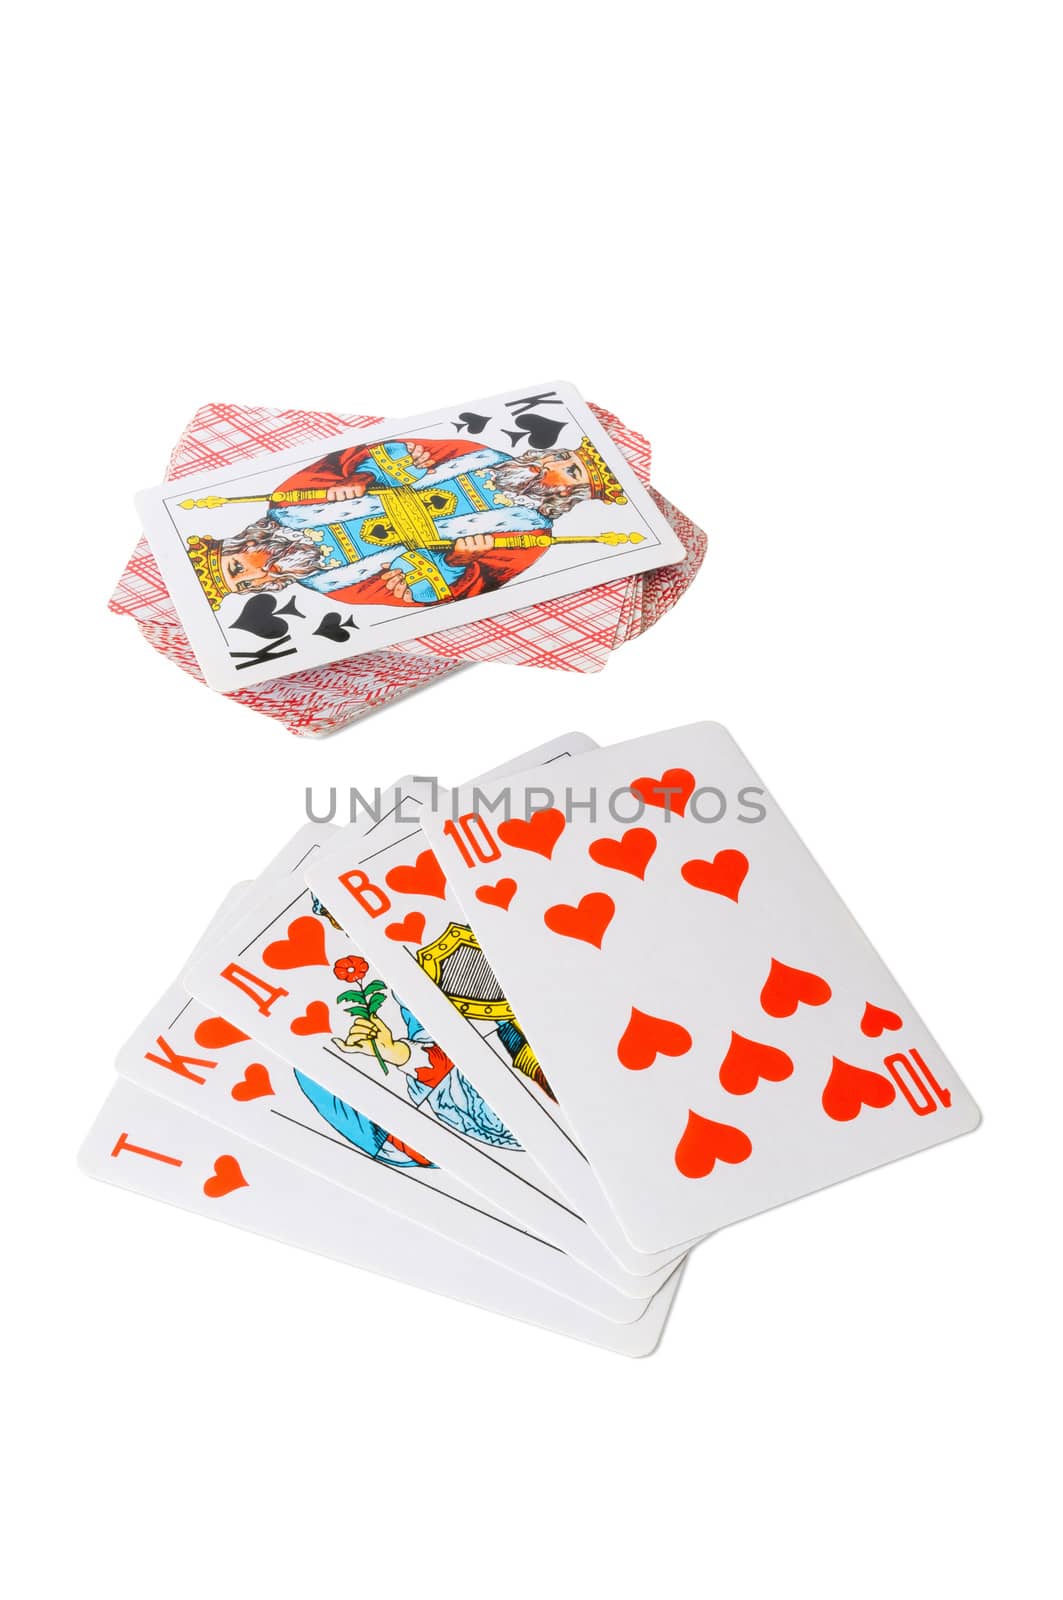 A straight Flush with russian cards, with cyrillic types